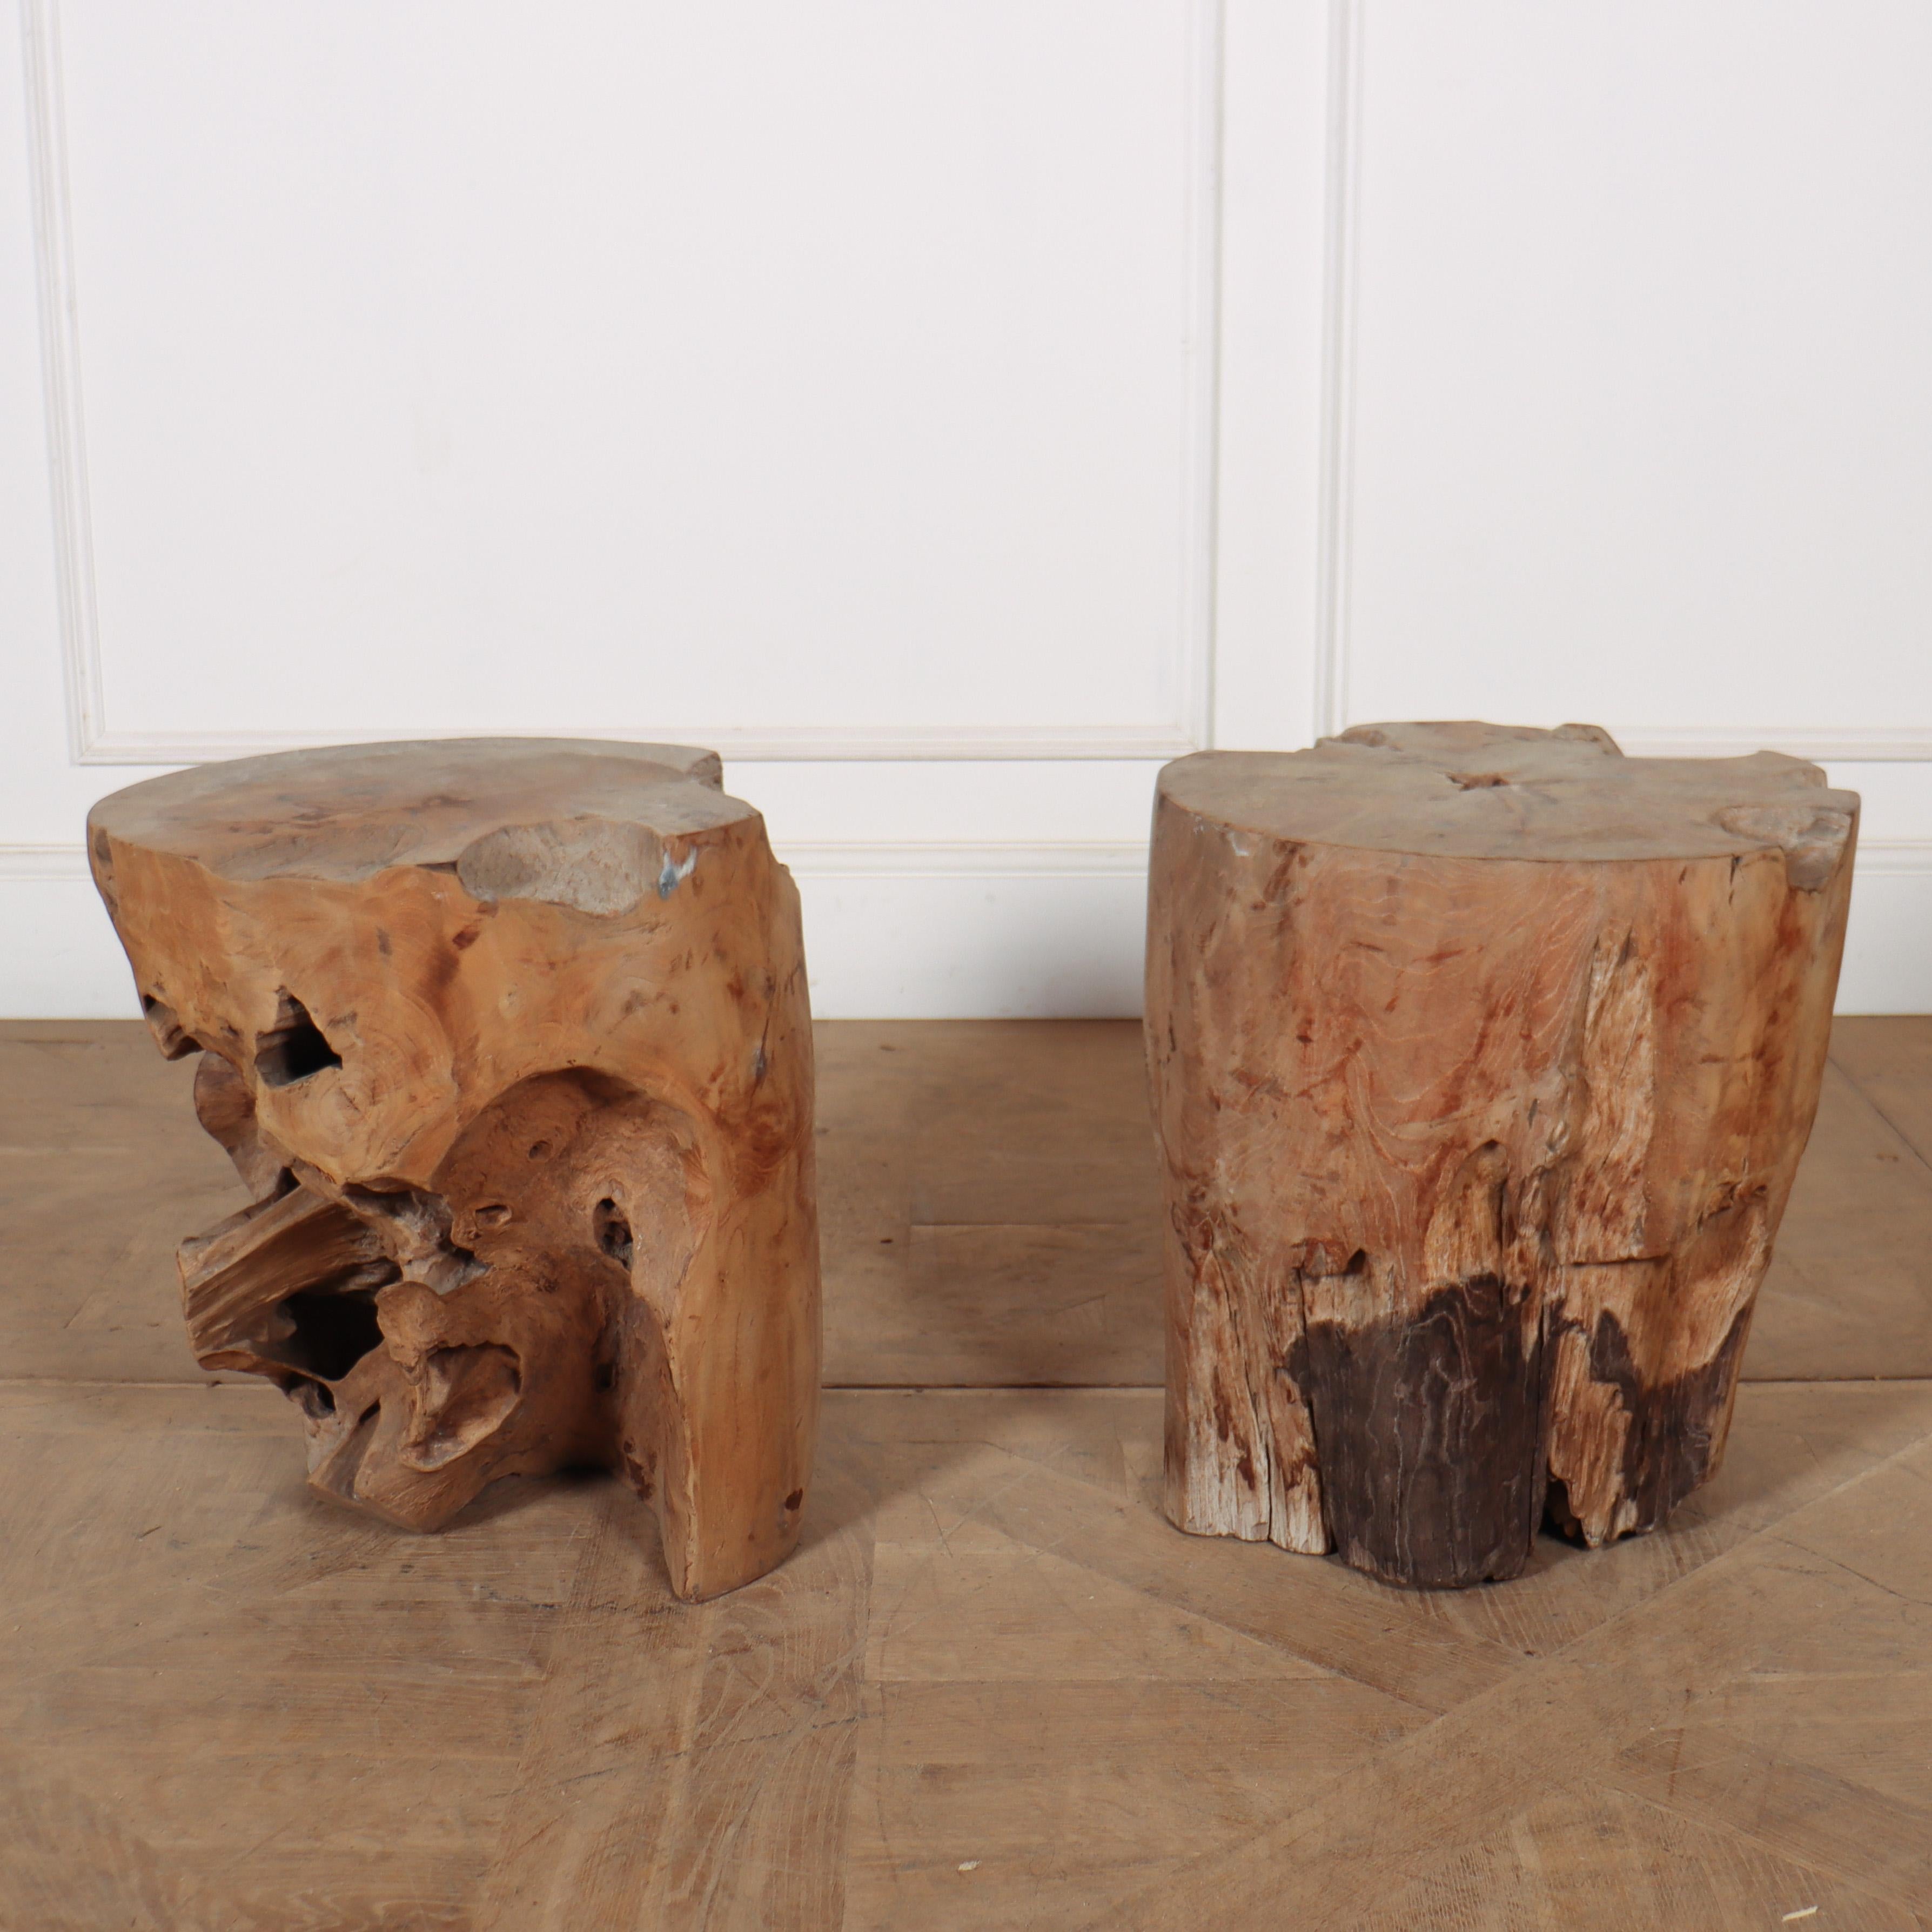 Pair of small primitive root wood side tables.

Reference: 8143

Dimensions
17.5 inches (44 cms) High
16 inches (41 cms) Diameter